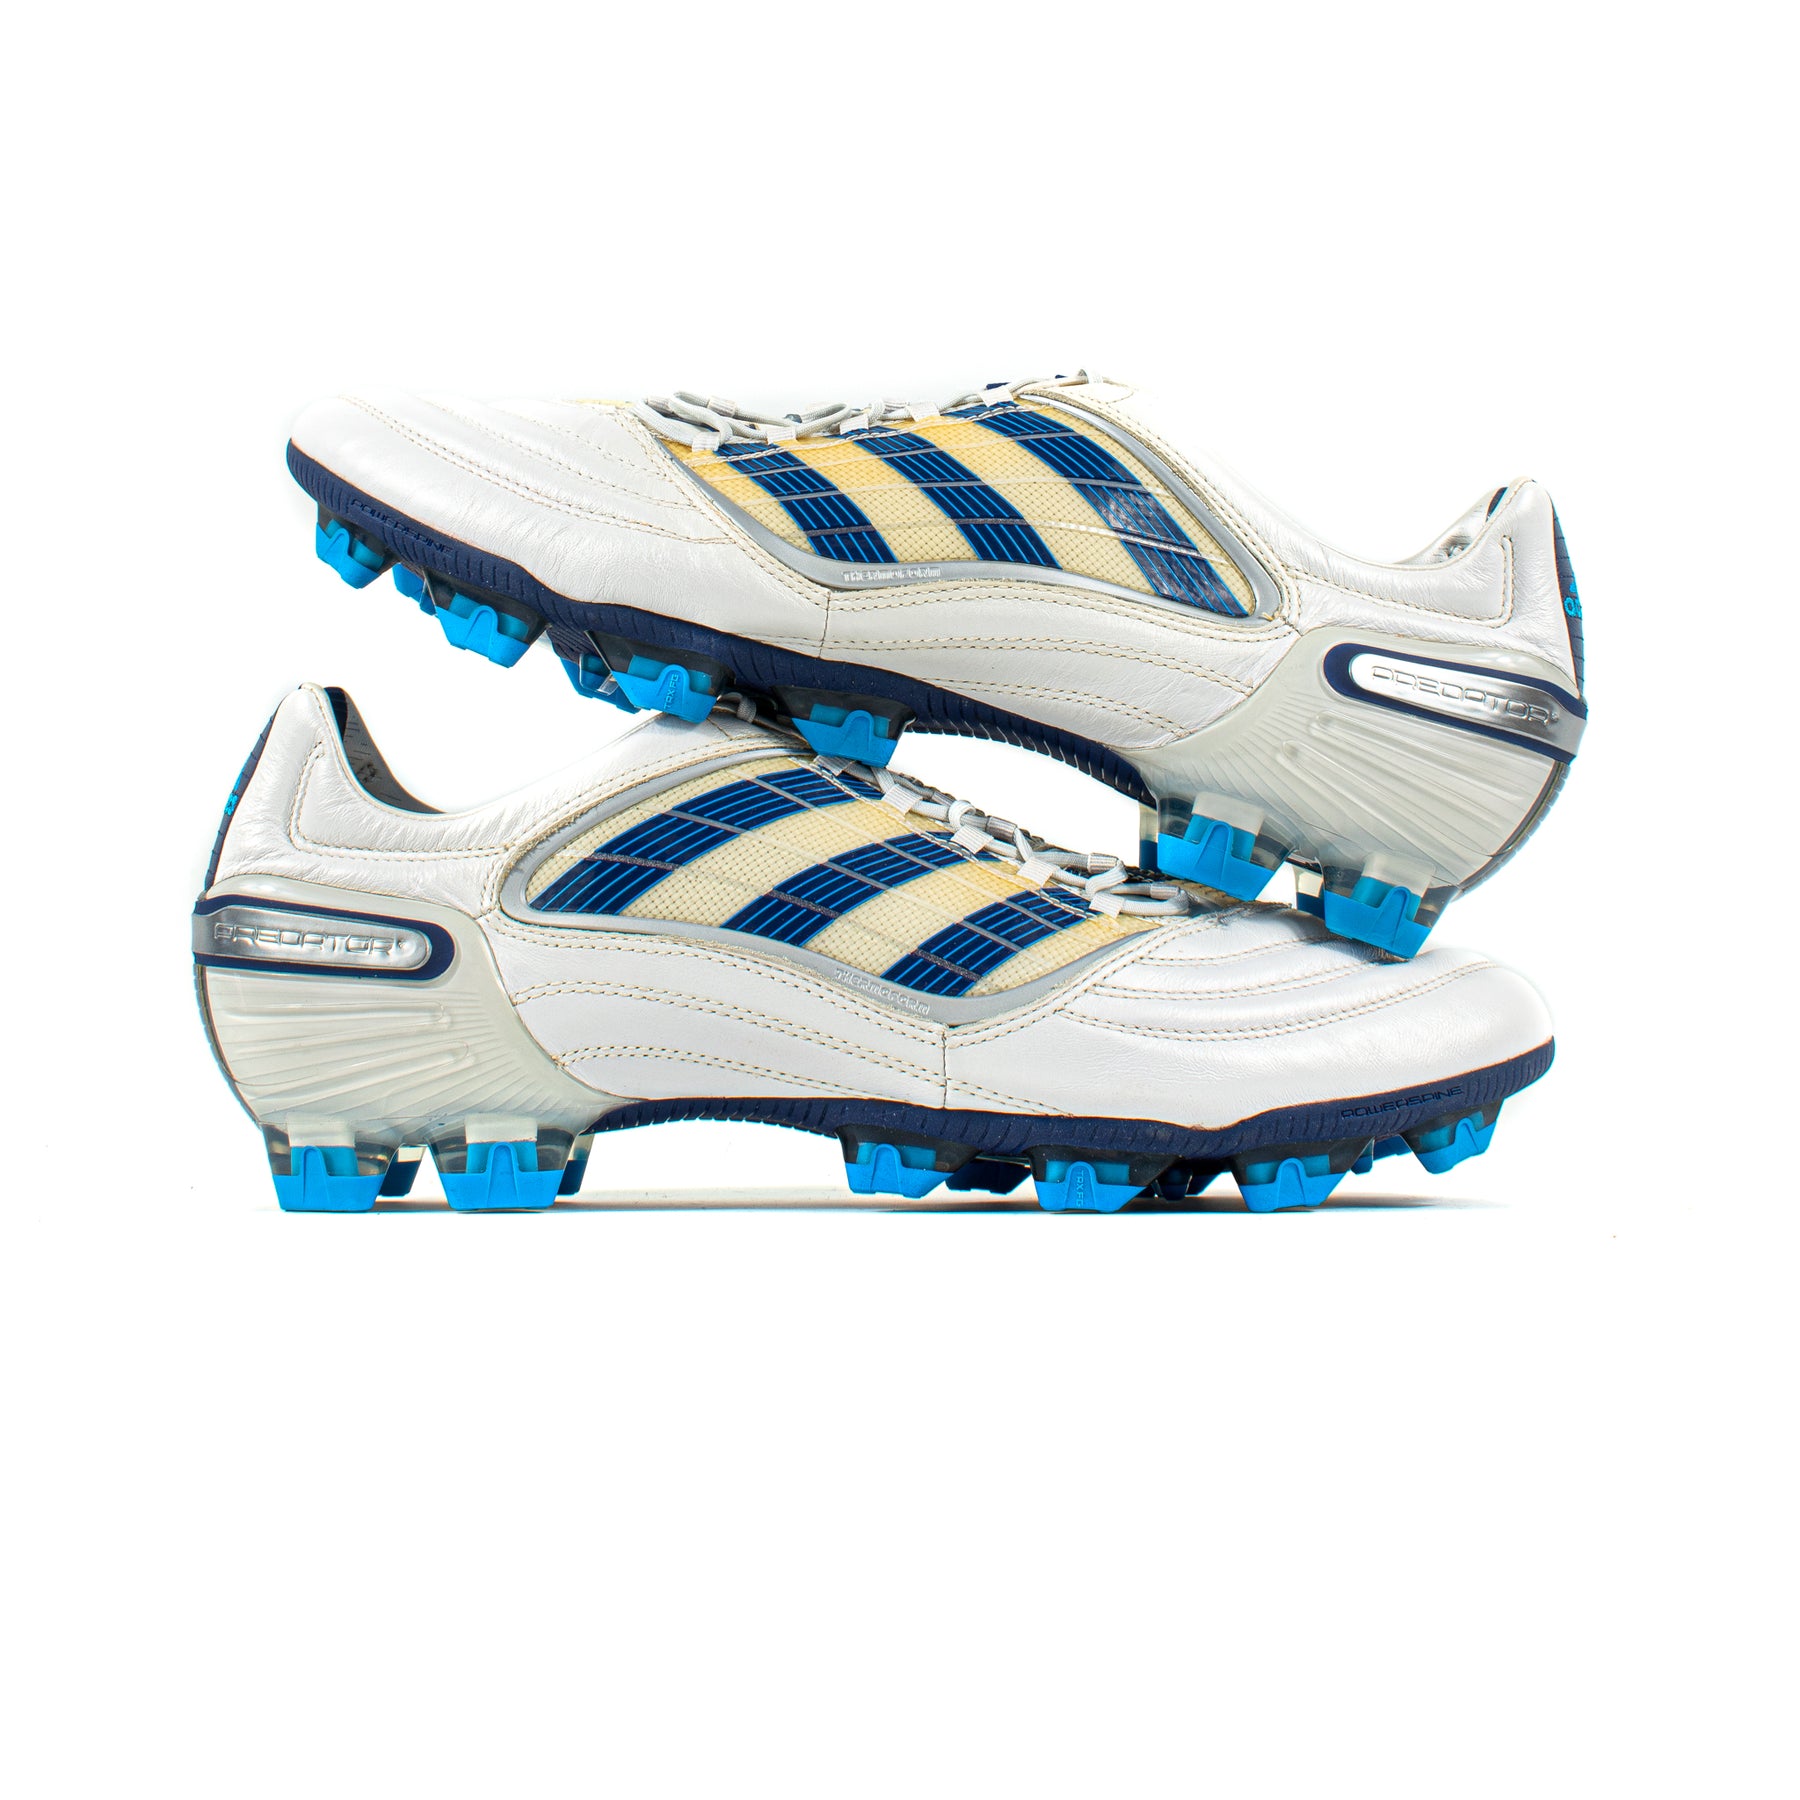 Adidas X CL FG – Classic Soccer Cleats